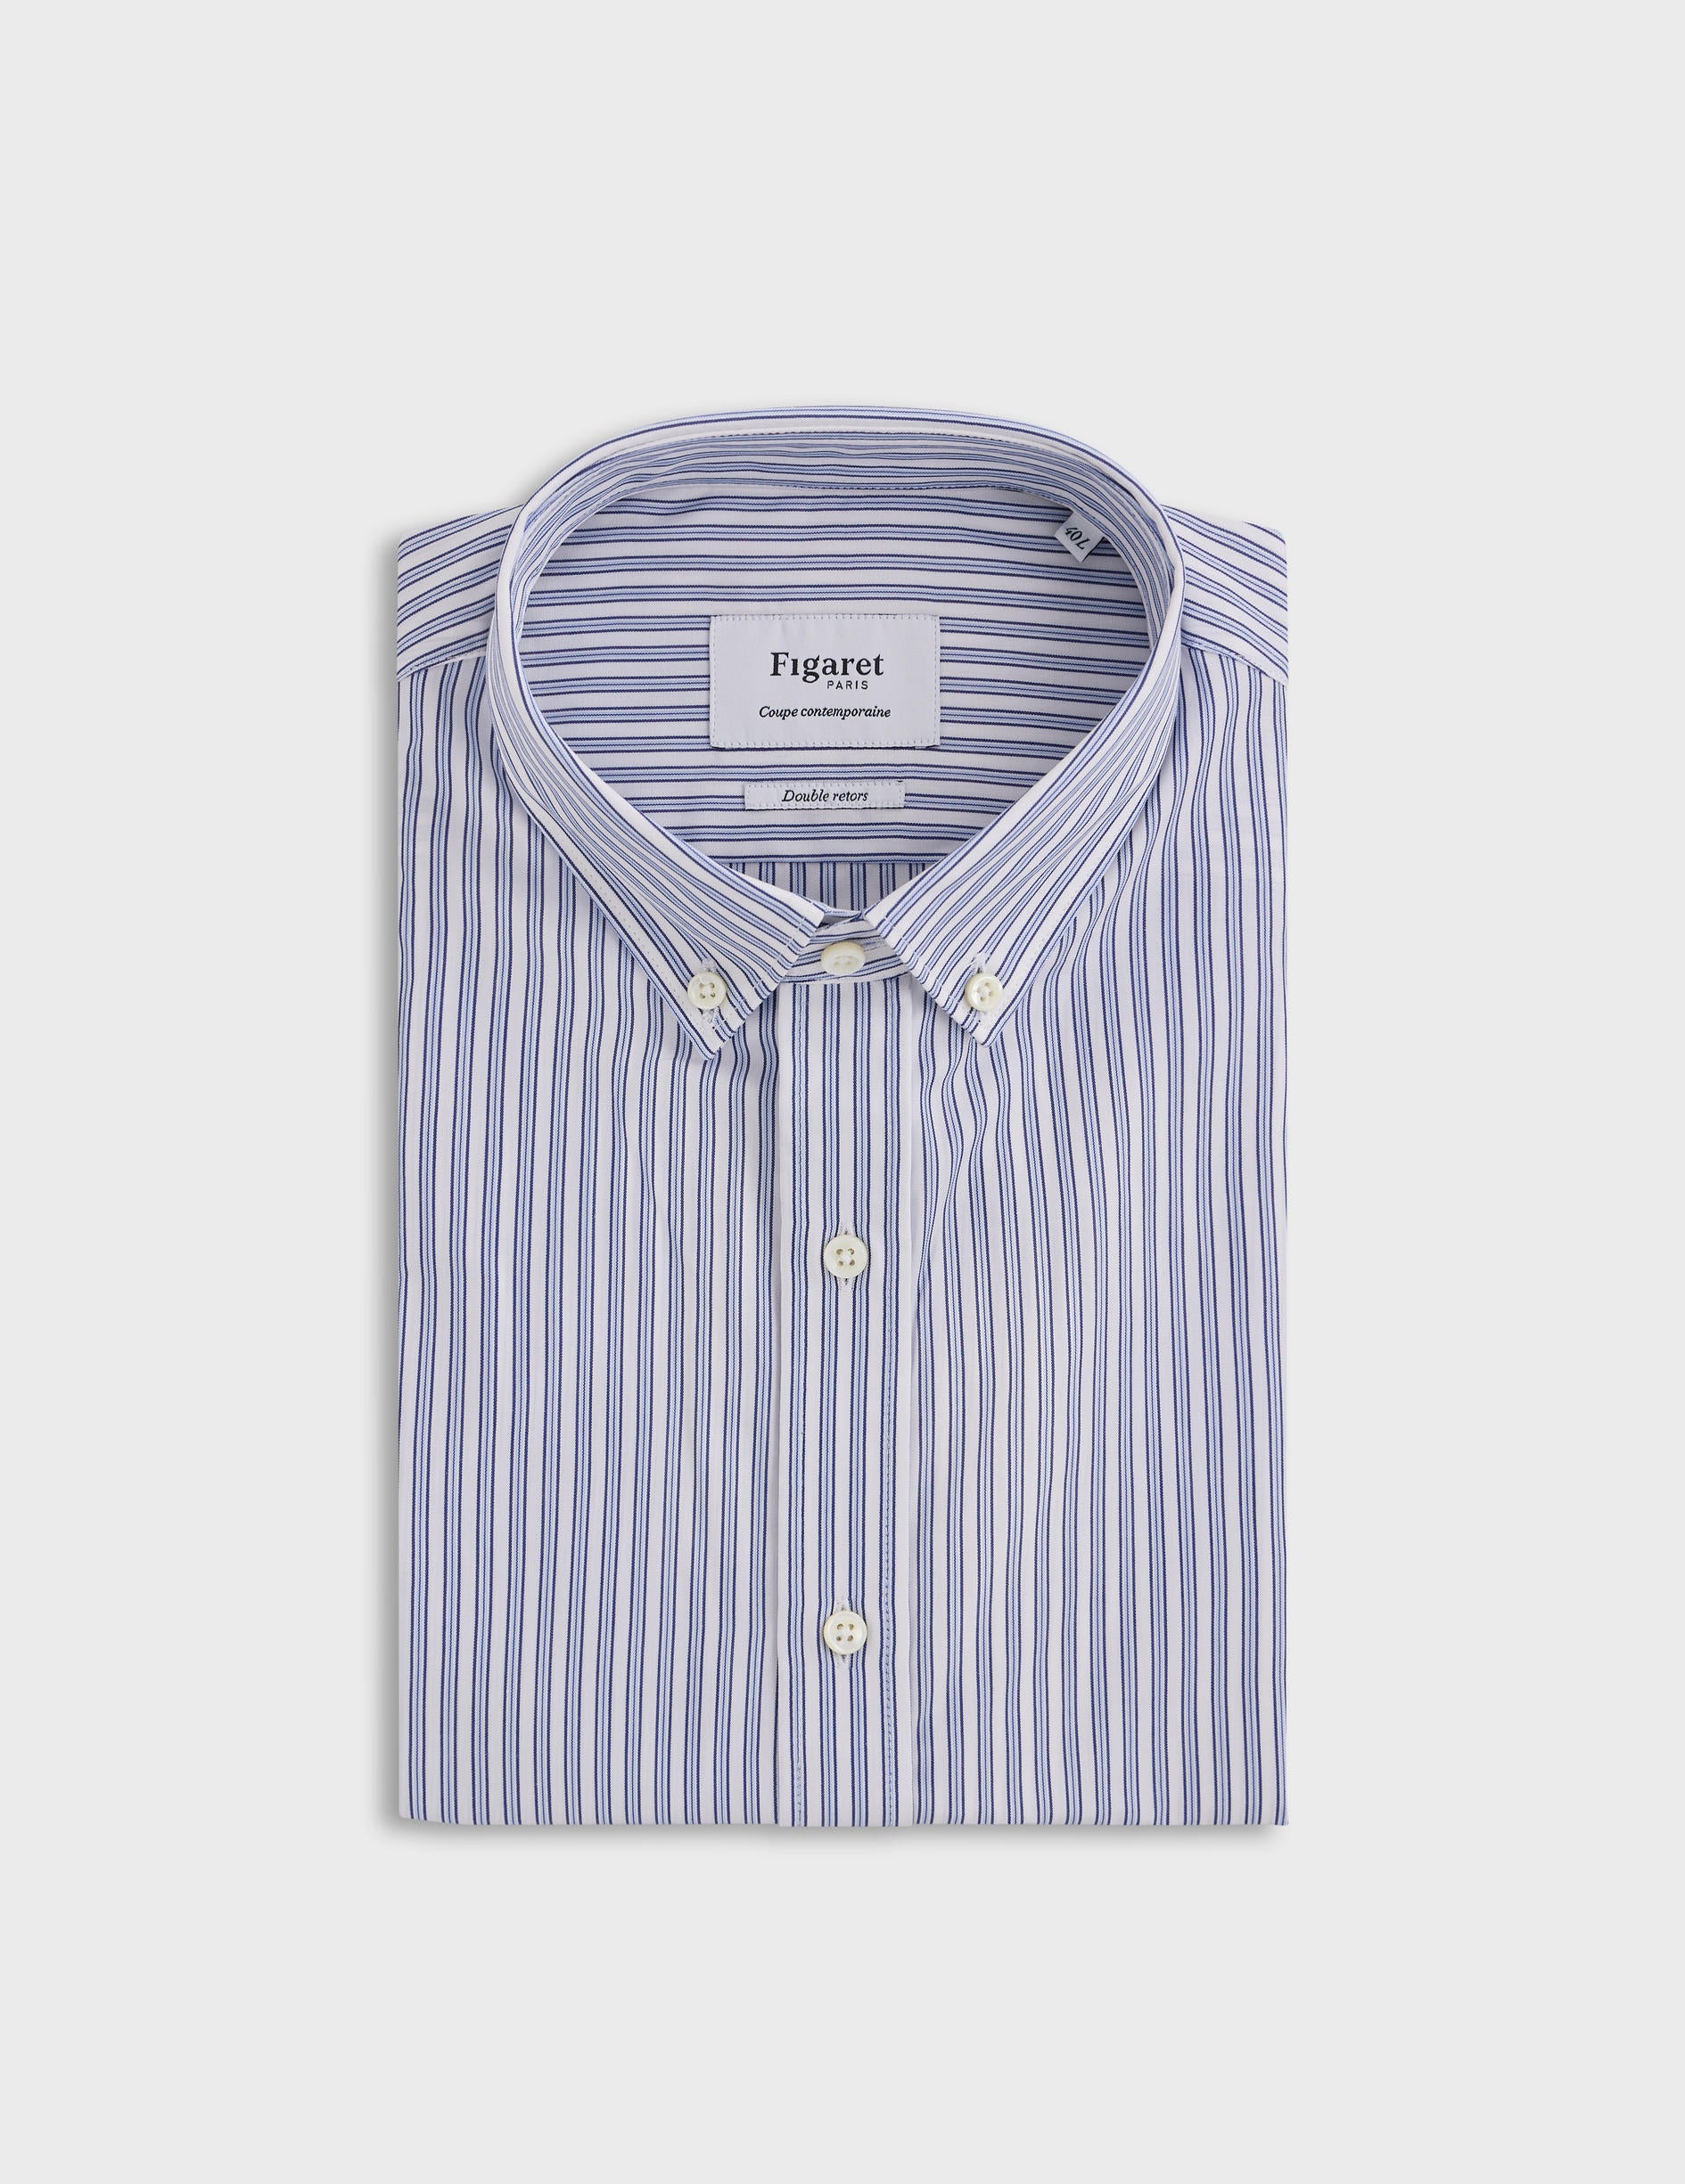 Semi-fitted navy striped shirt